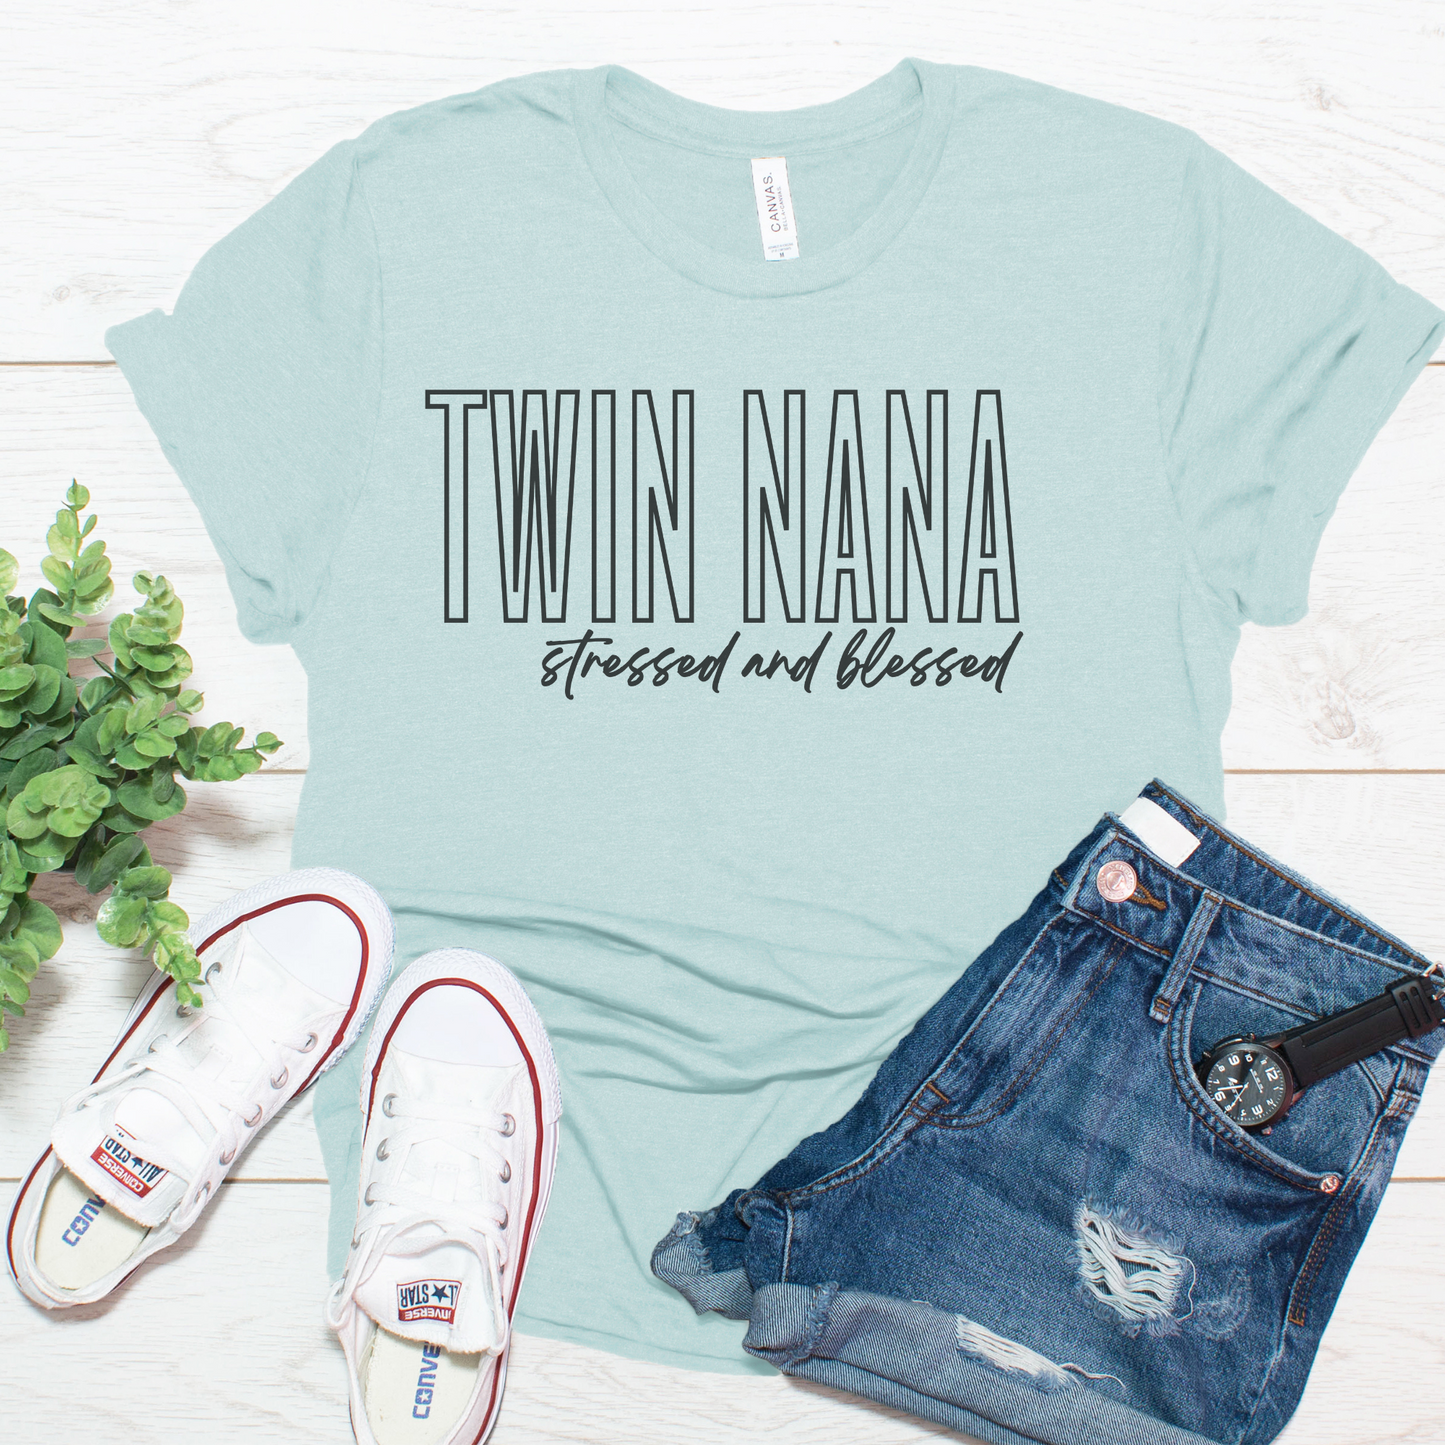 Twin Nana Stressed and Blessed Black Block Hollow Letters Paint Style Script Unisex Jersey Short Sleeve Tee Small-3XL Multiples